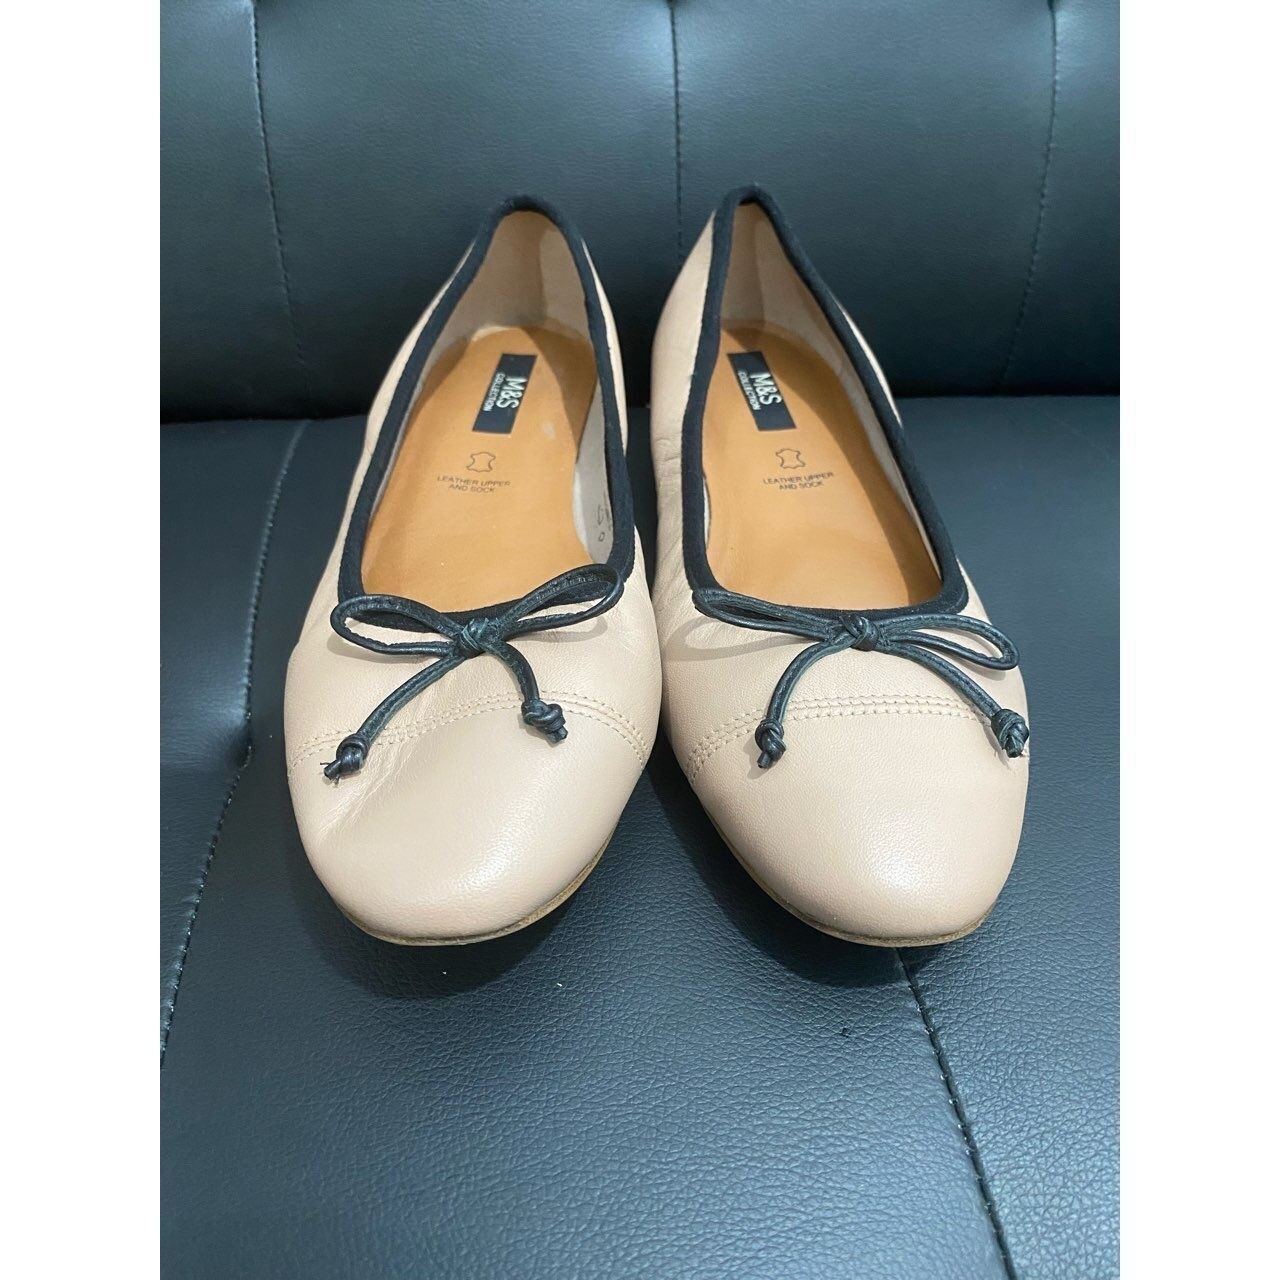 Marks & Spencer leather Bow Beige Flats